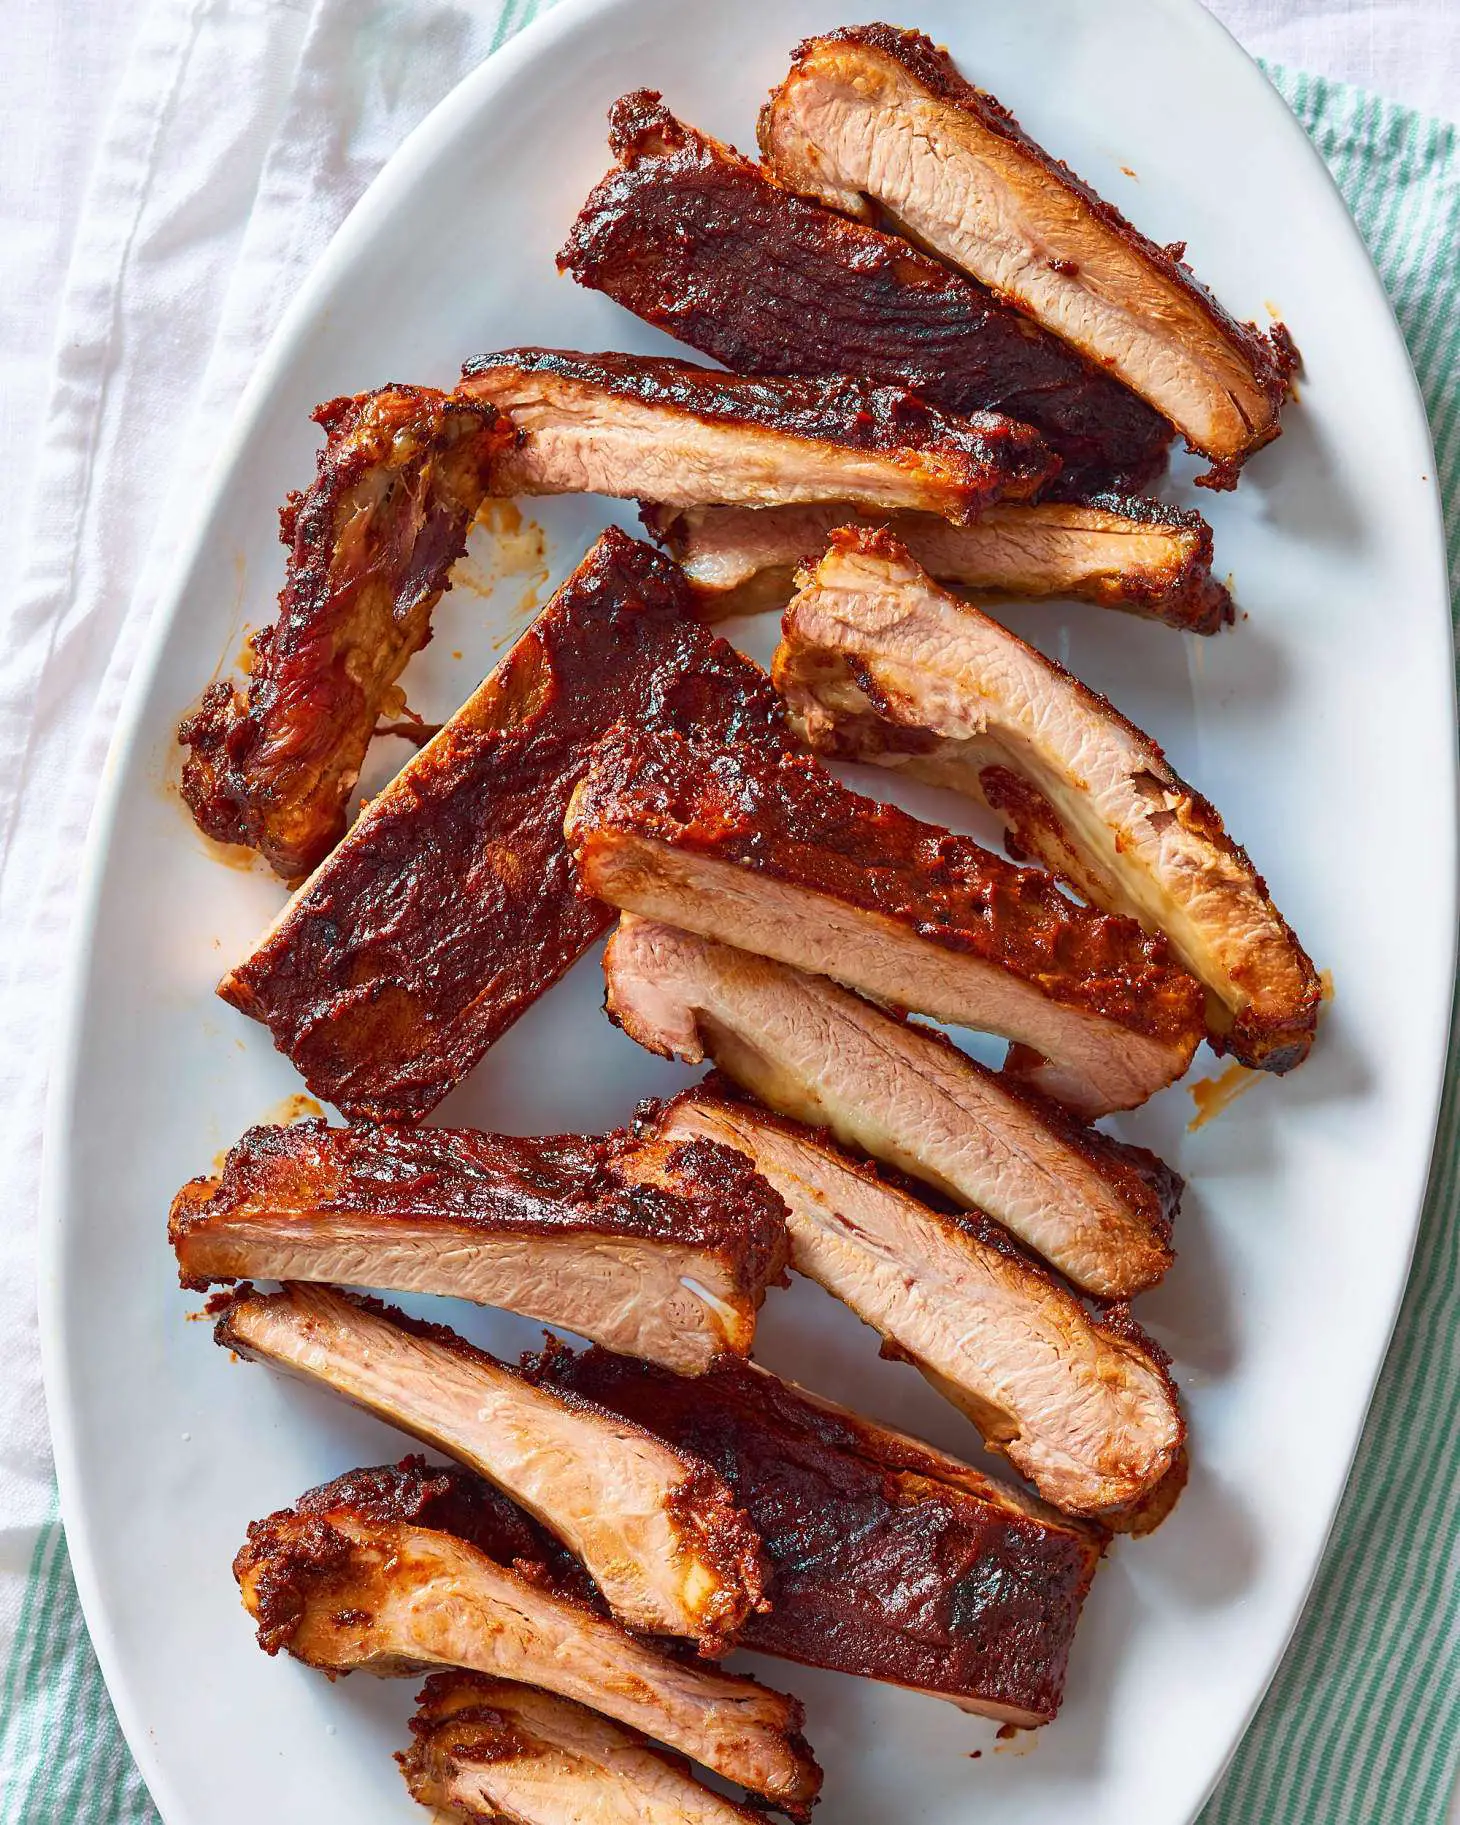 How To Make Great Ribs in the Oven